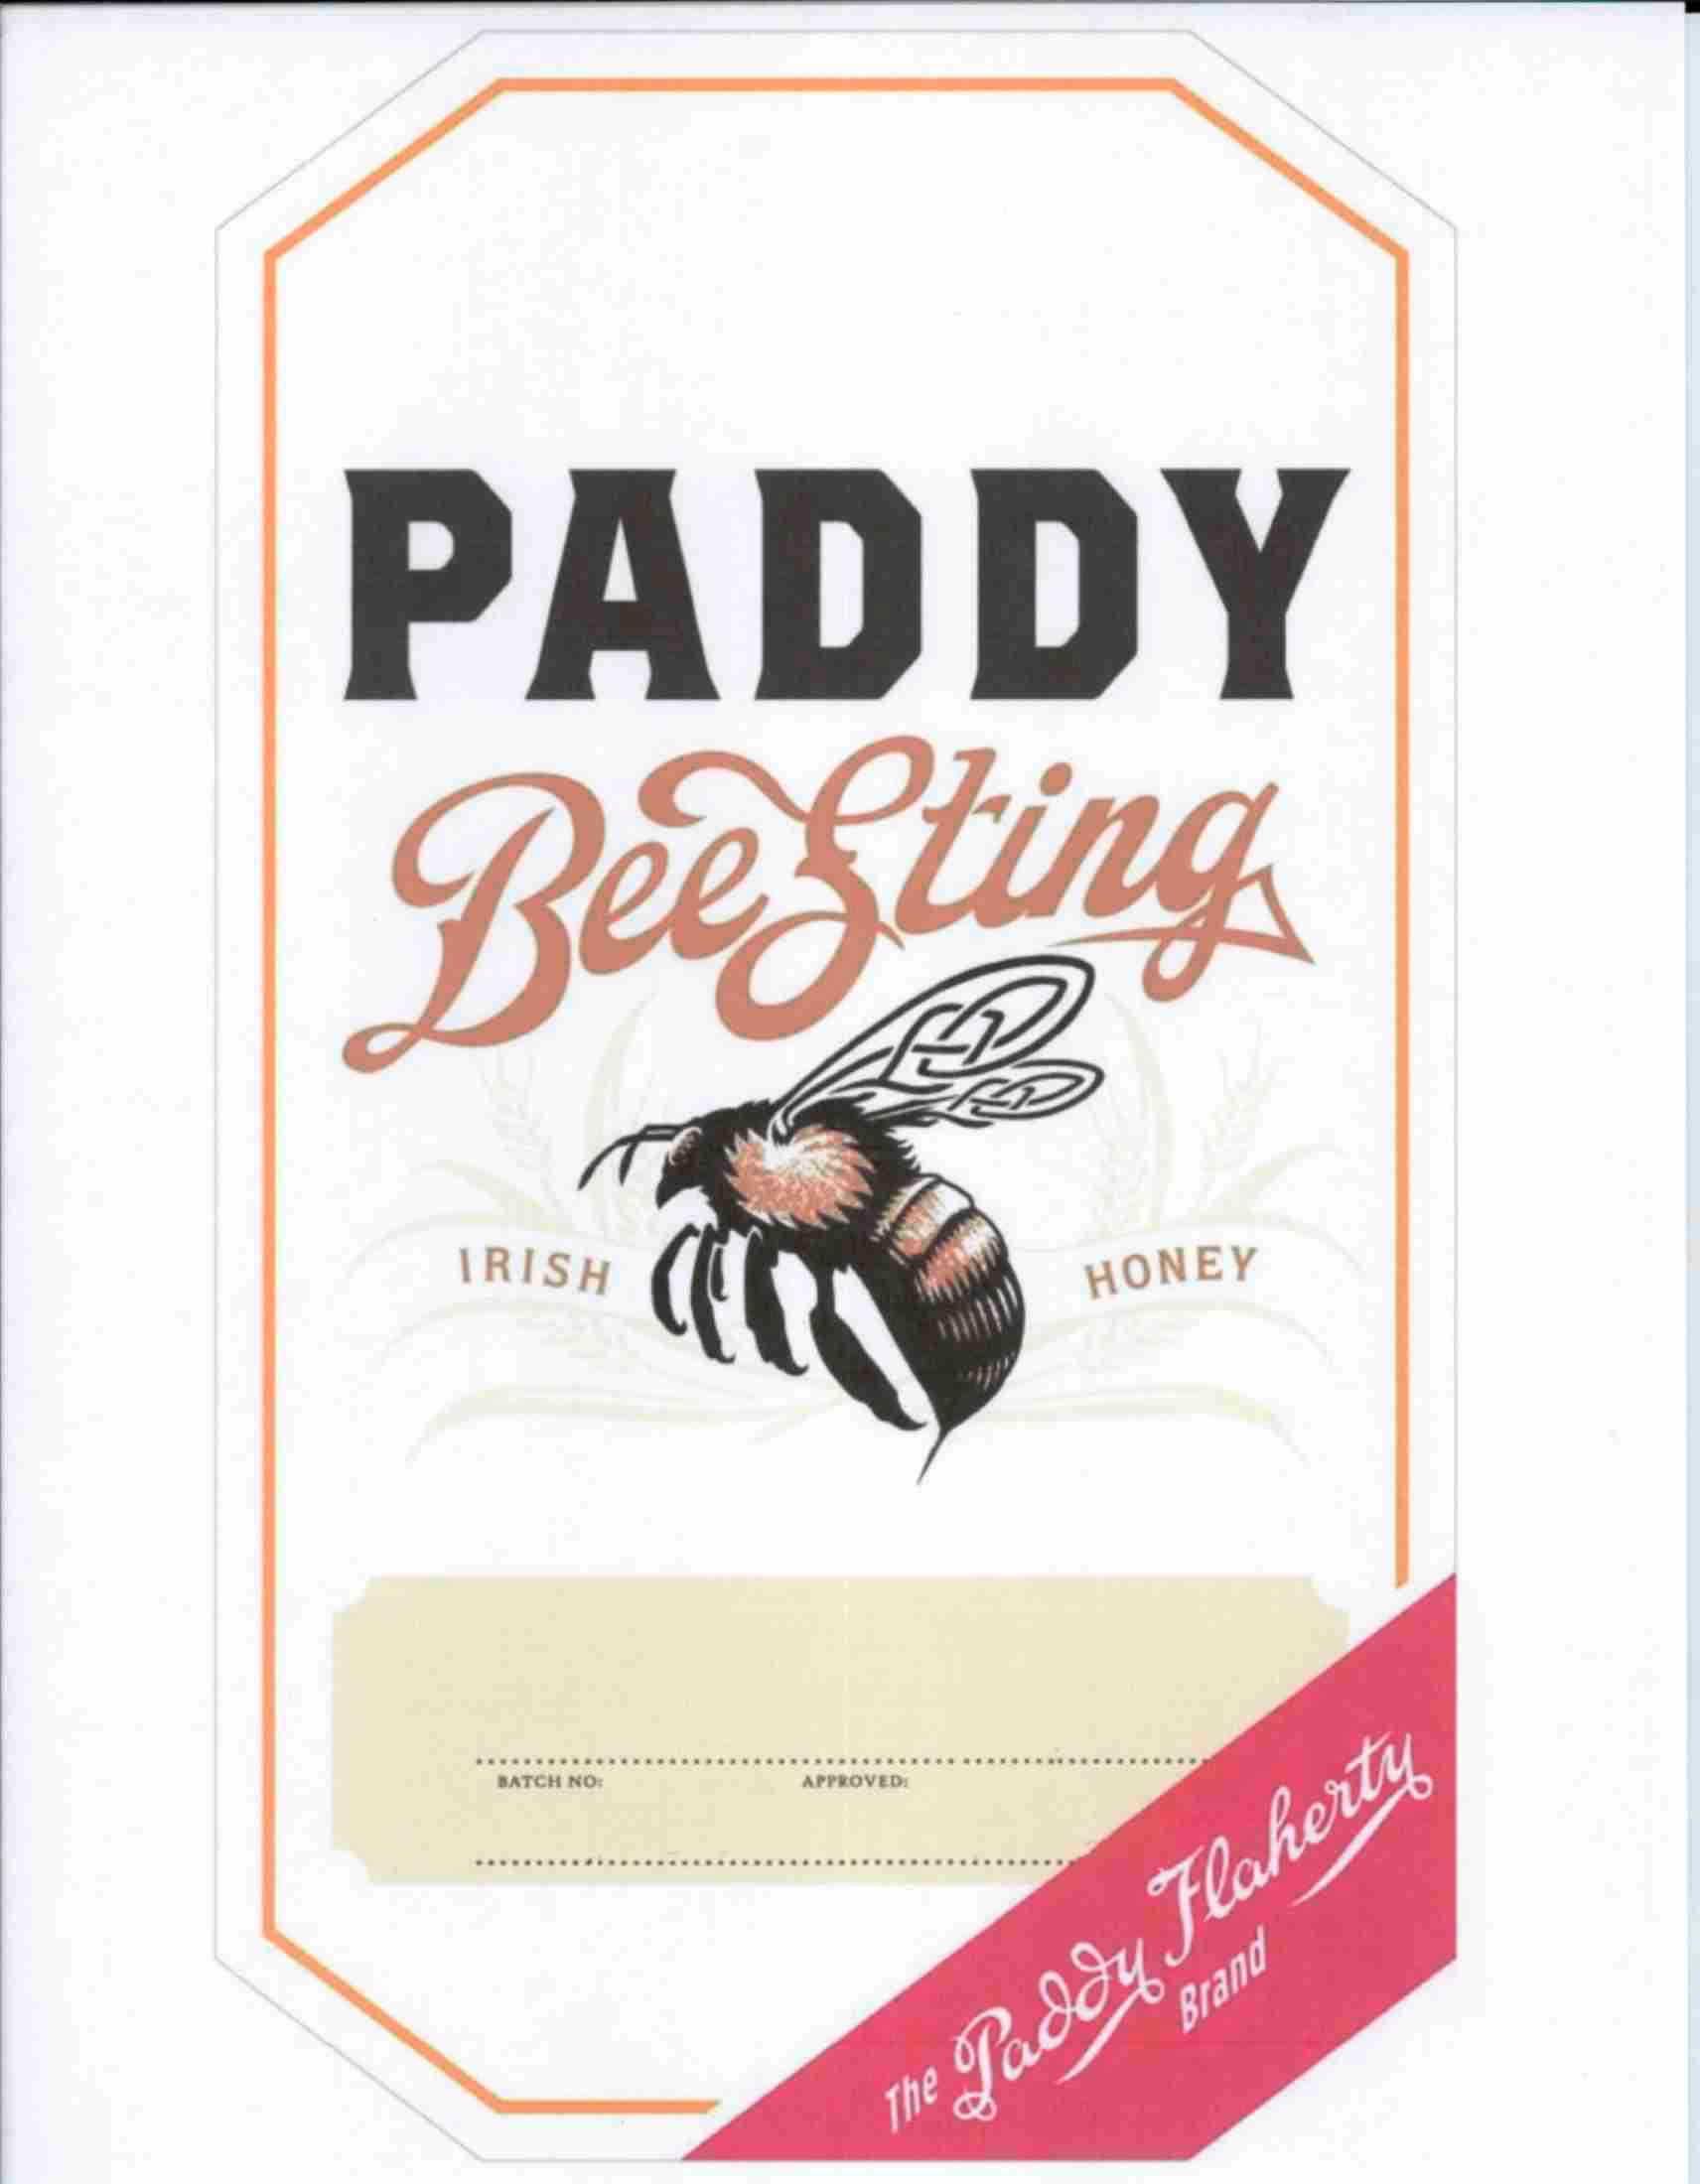  PADDY BEE STING IRISH HONEY THE PADDY FLAHERTY BRAND PREMIUM LIQUEUR WITH IRISH HONEY AND NATURAL FLAVORS BLENDED WITH PADDY IRI